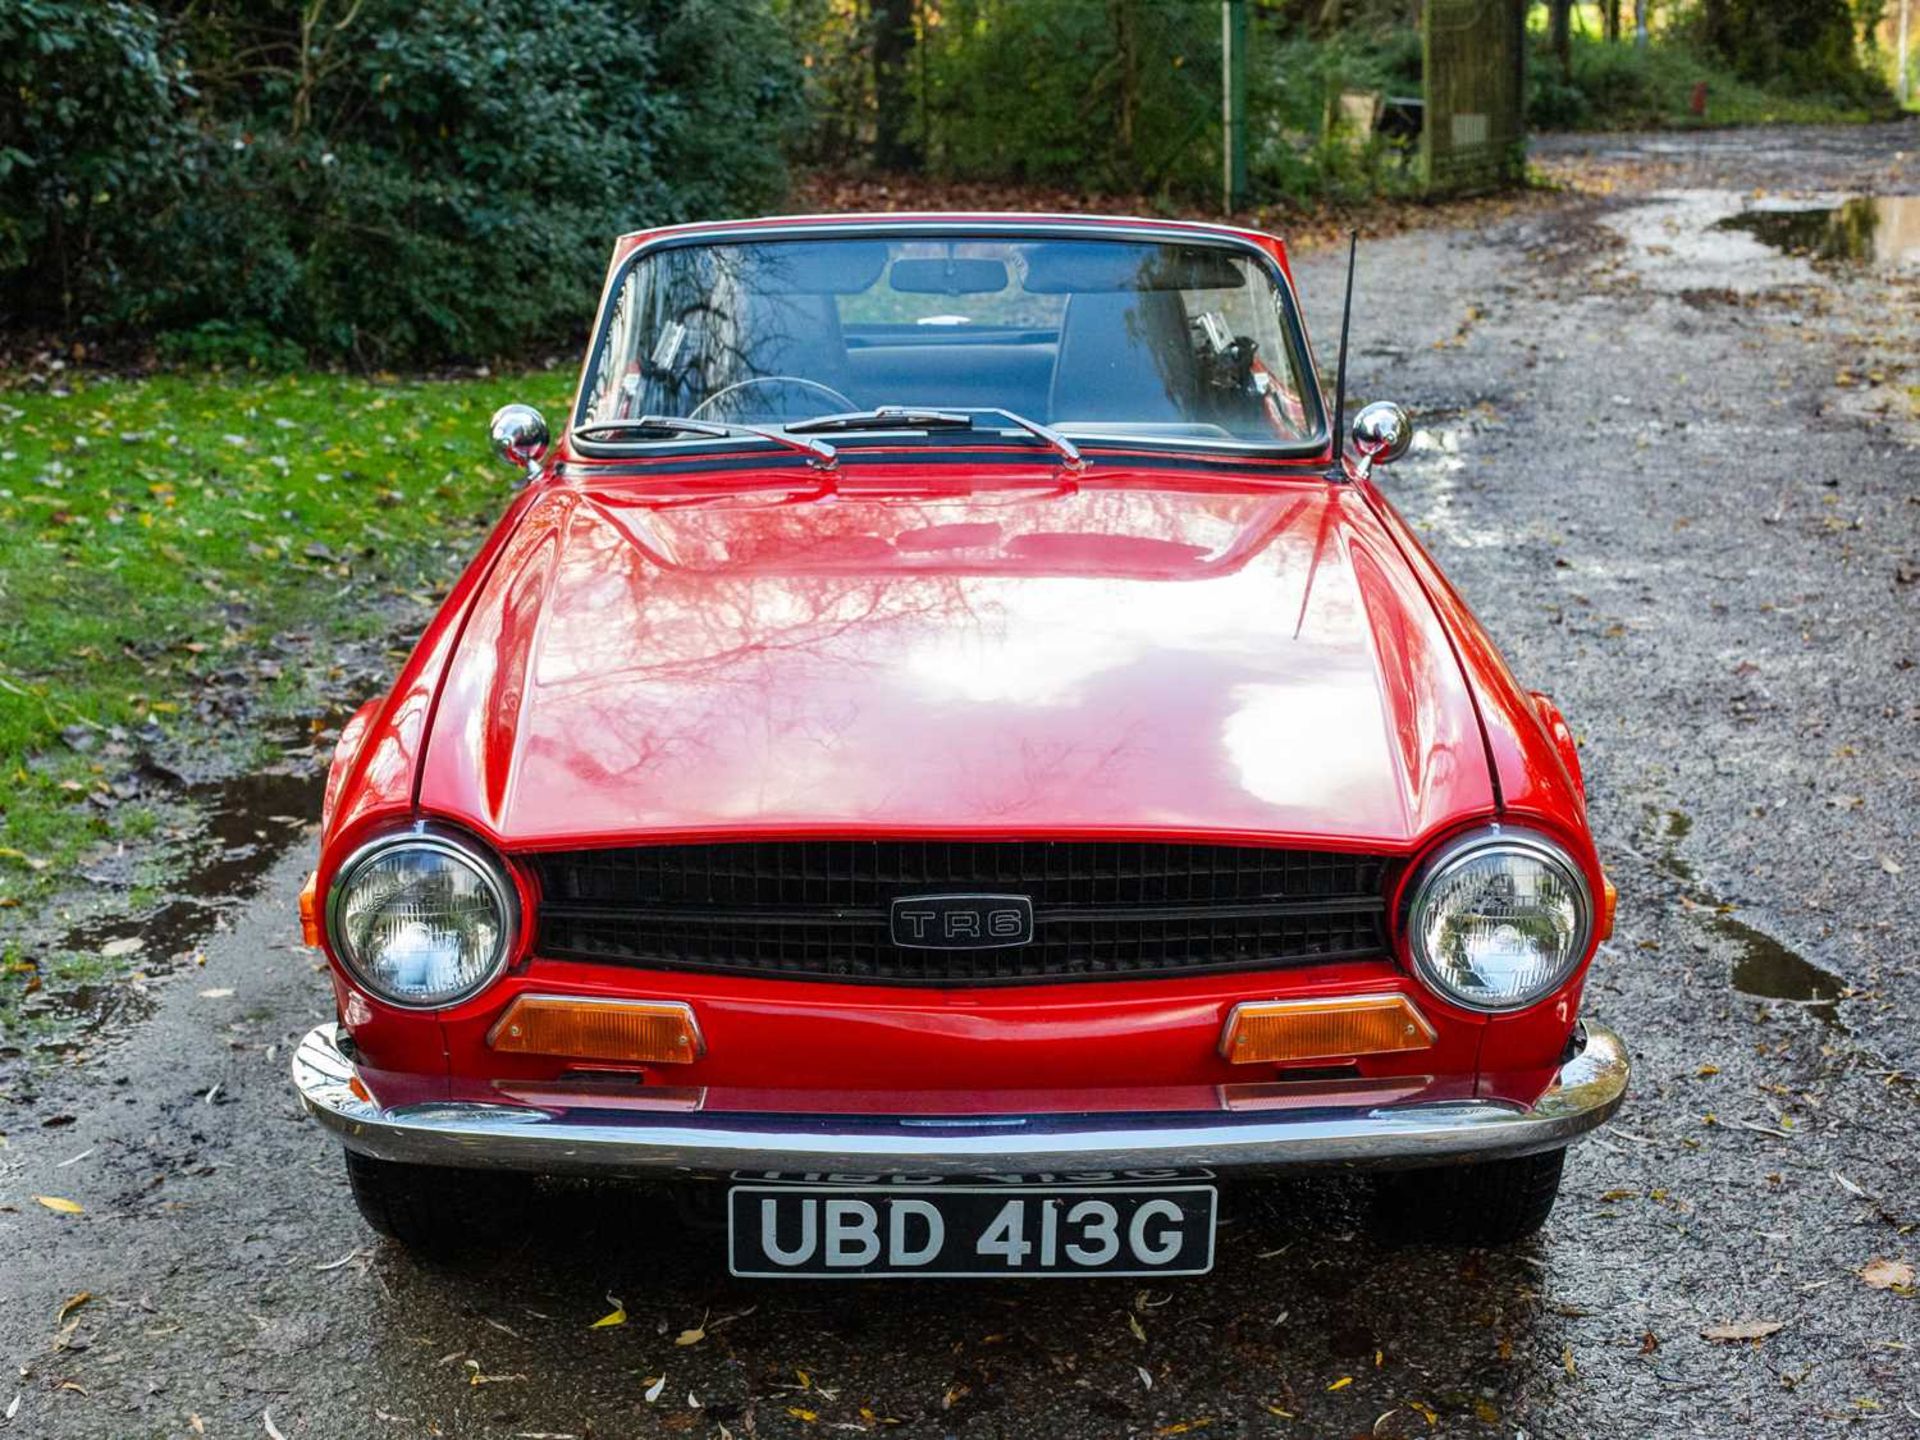 1969 Triumph TR6 Repatriated in 2020, converted to RHD and equipped with UK-specification SU carbure - Image 2 of 53